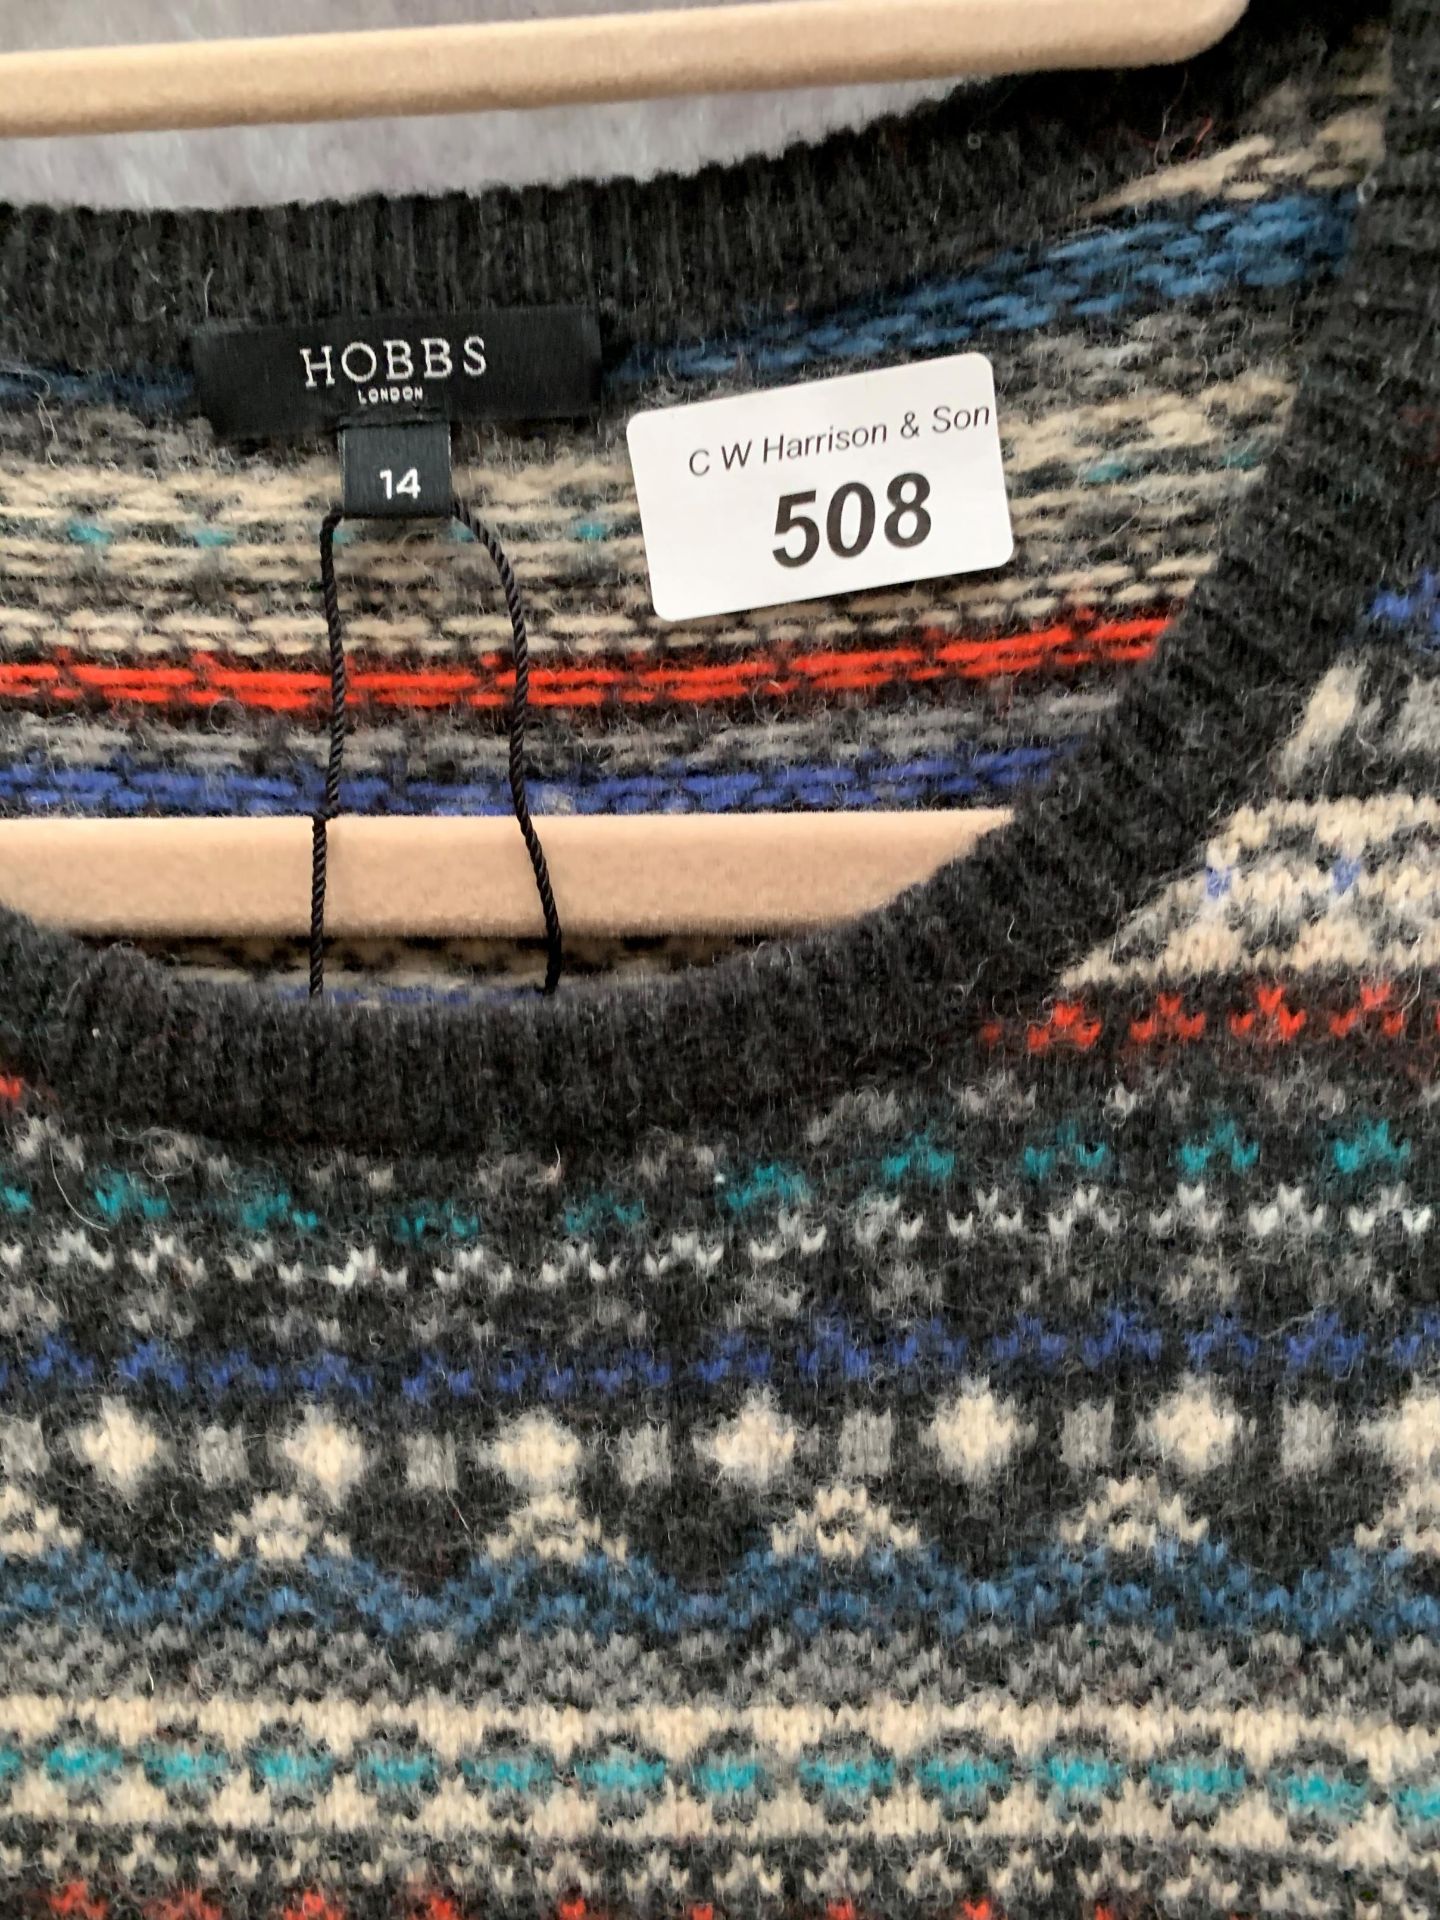 A Hobbs ladies knitted dress, charcoal striped and Fair Isle pattern, - Image 2 of 2